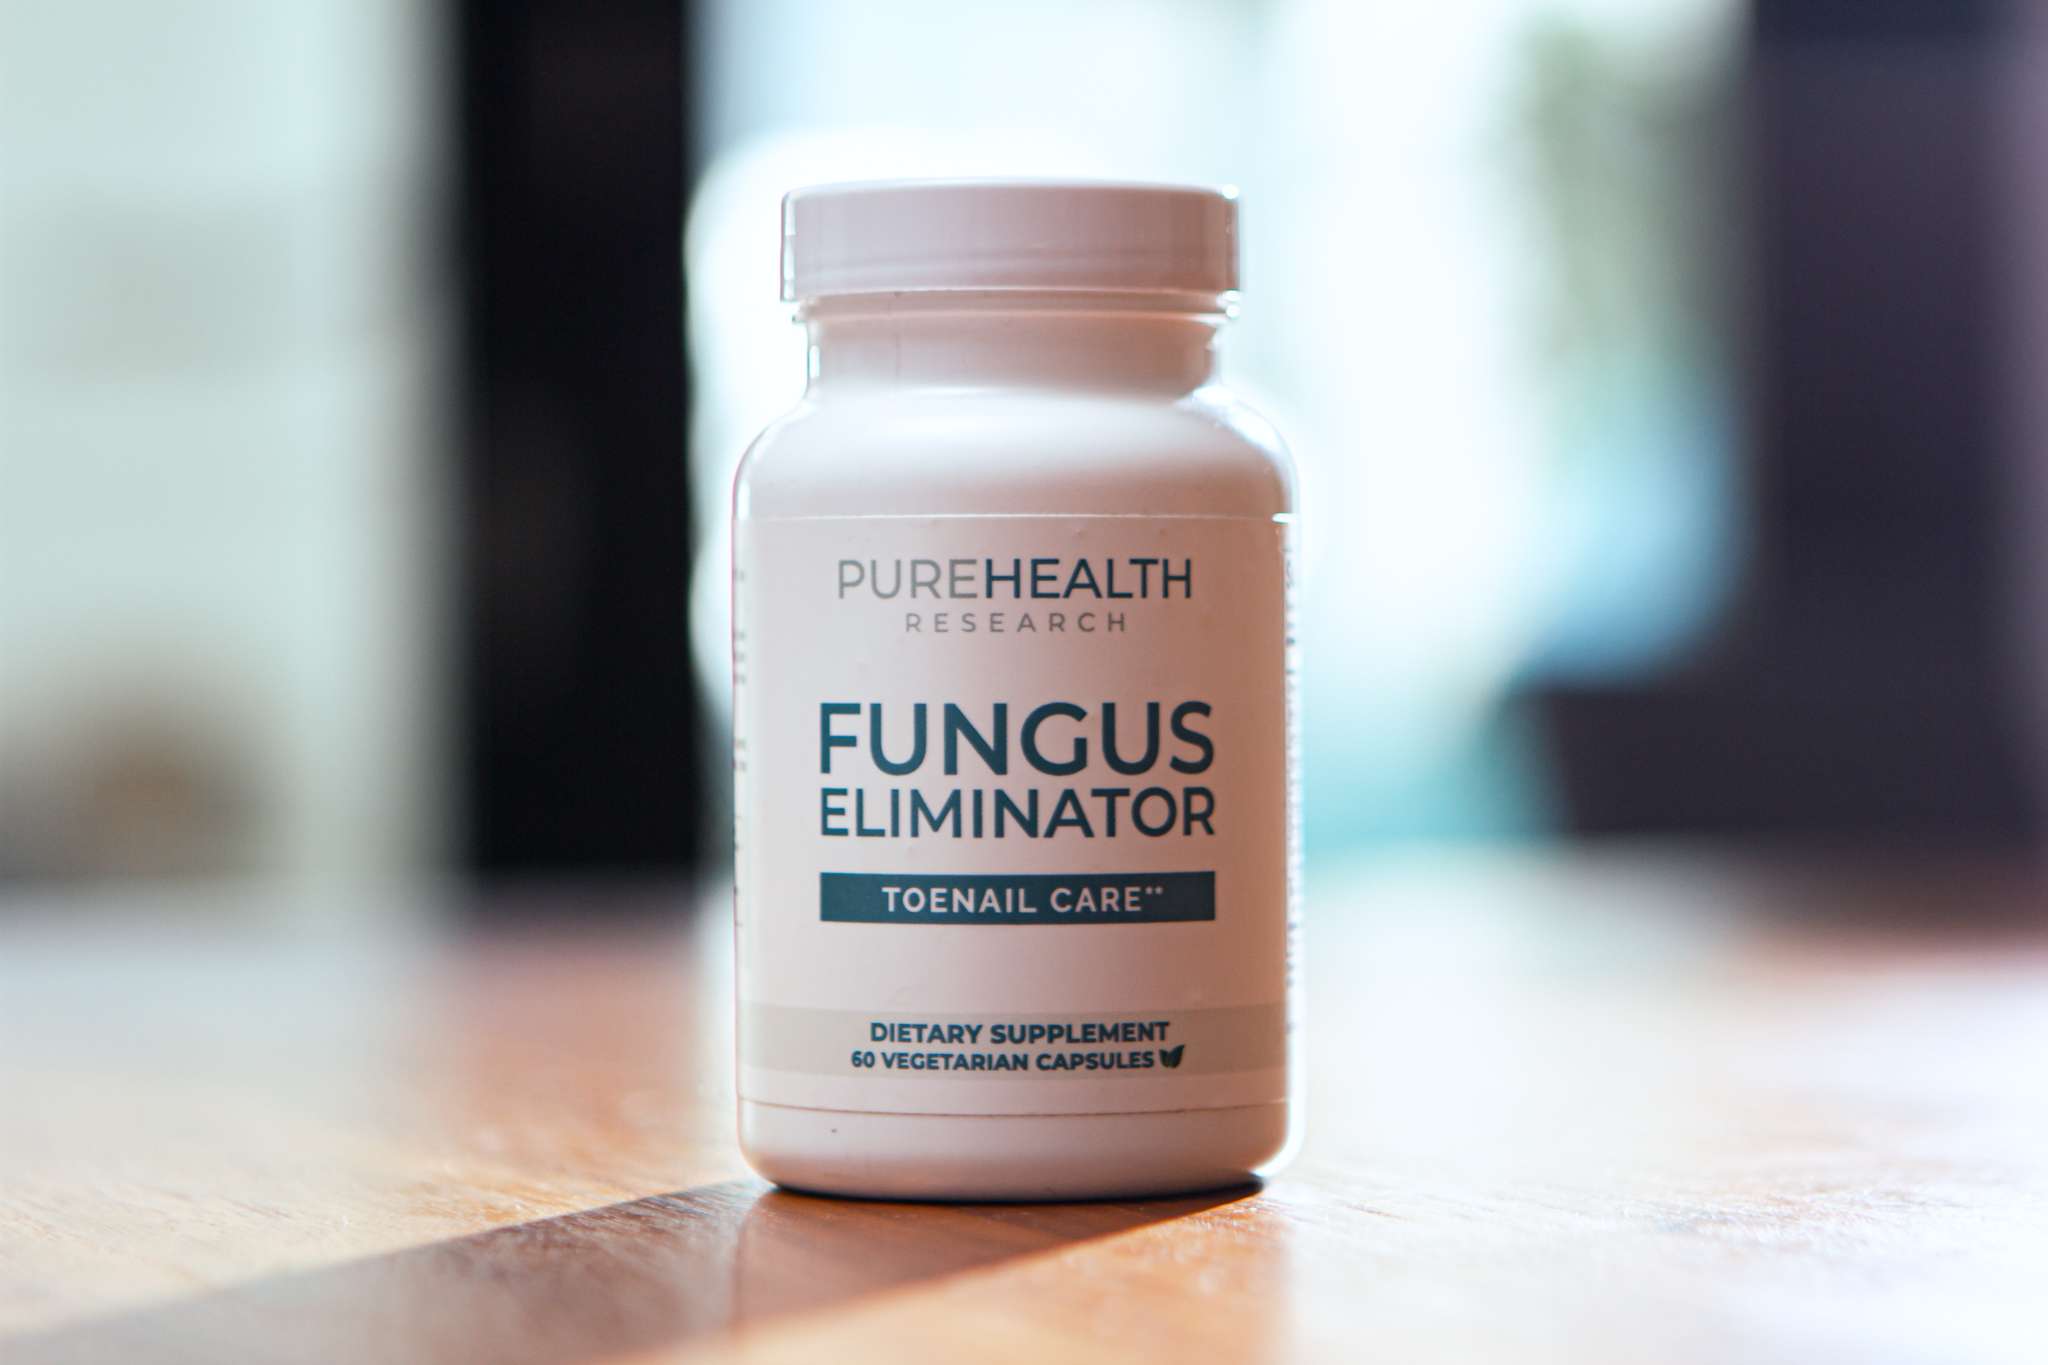 Fungus eliminator product by PureHealth Research